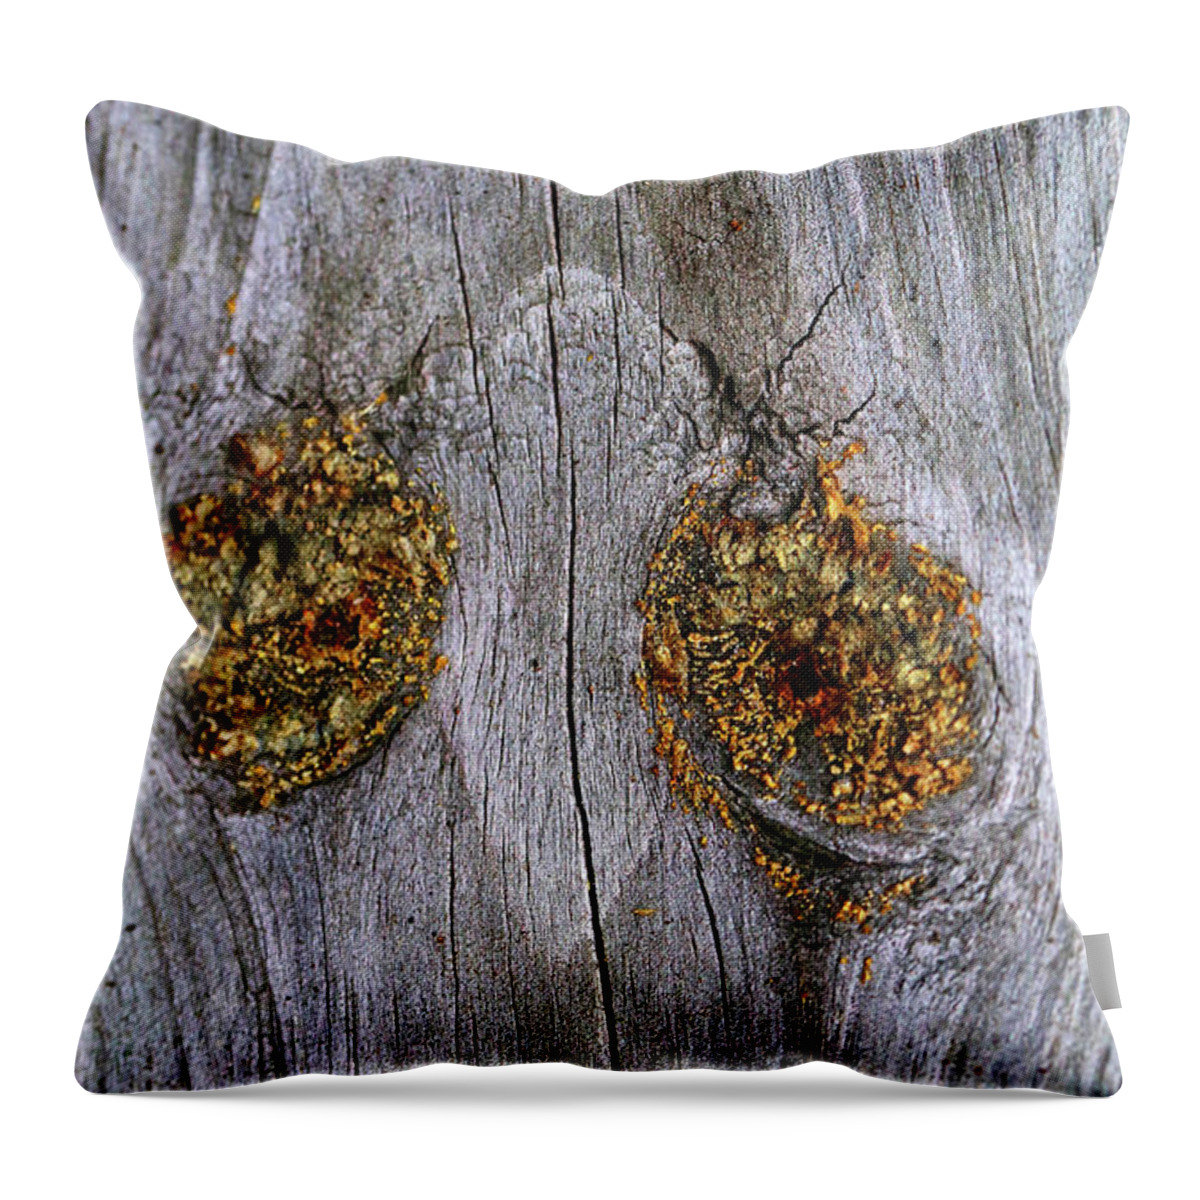 Wood Throw Pillow featuring the photograph Sad by Mary Bedy